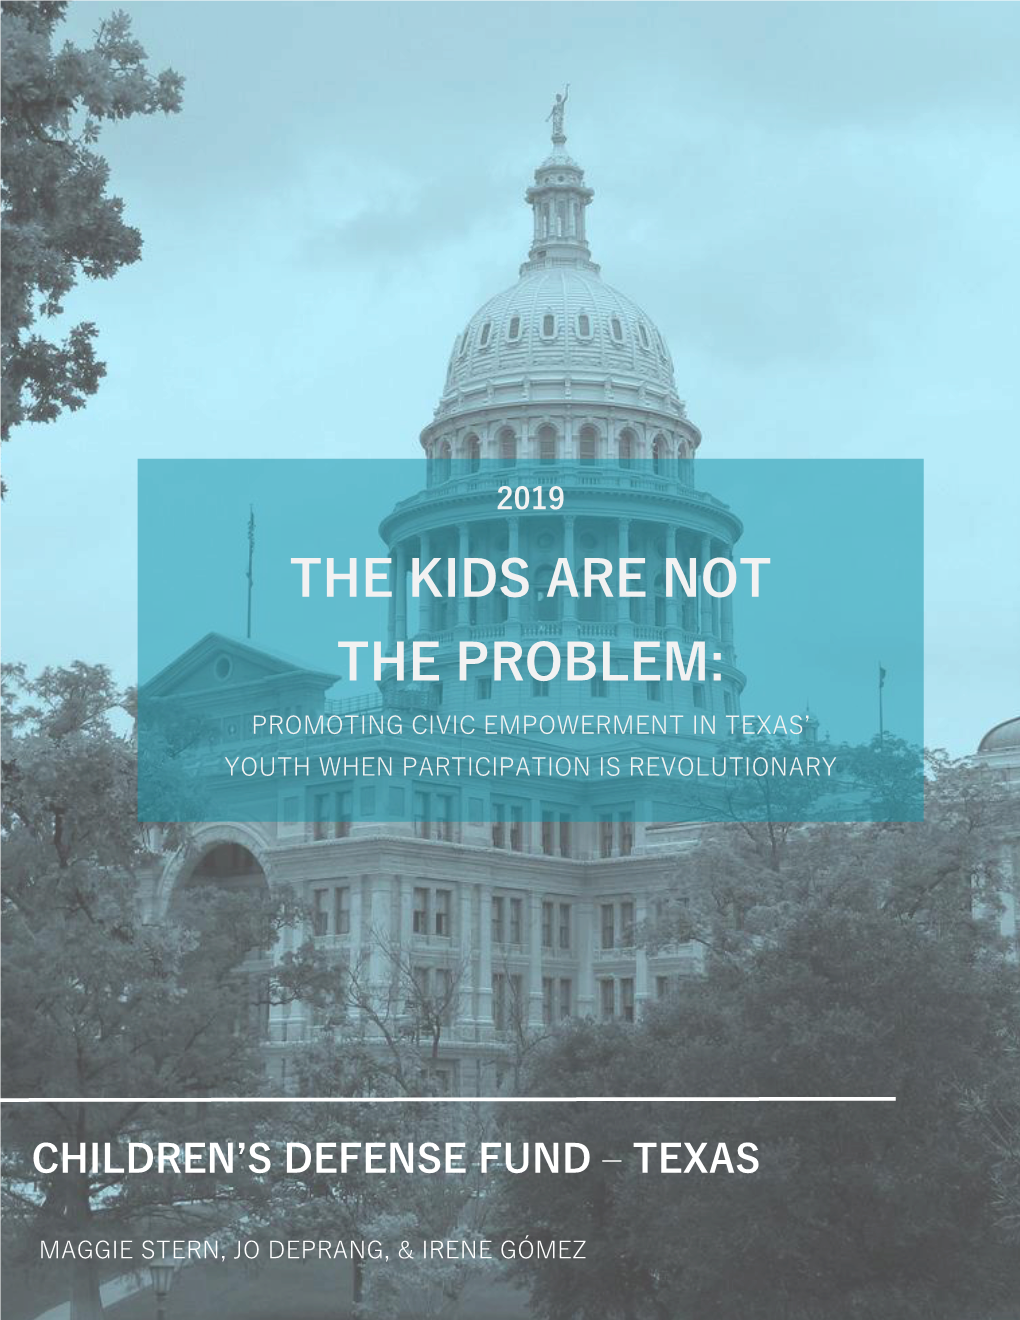 The Kids Are Not the Problem: Promoting Civic